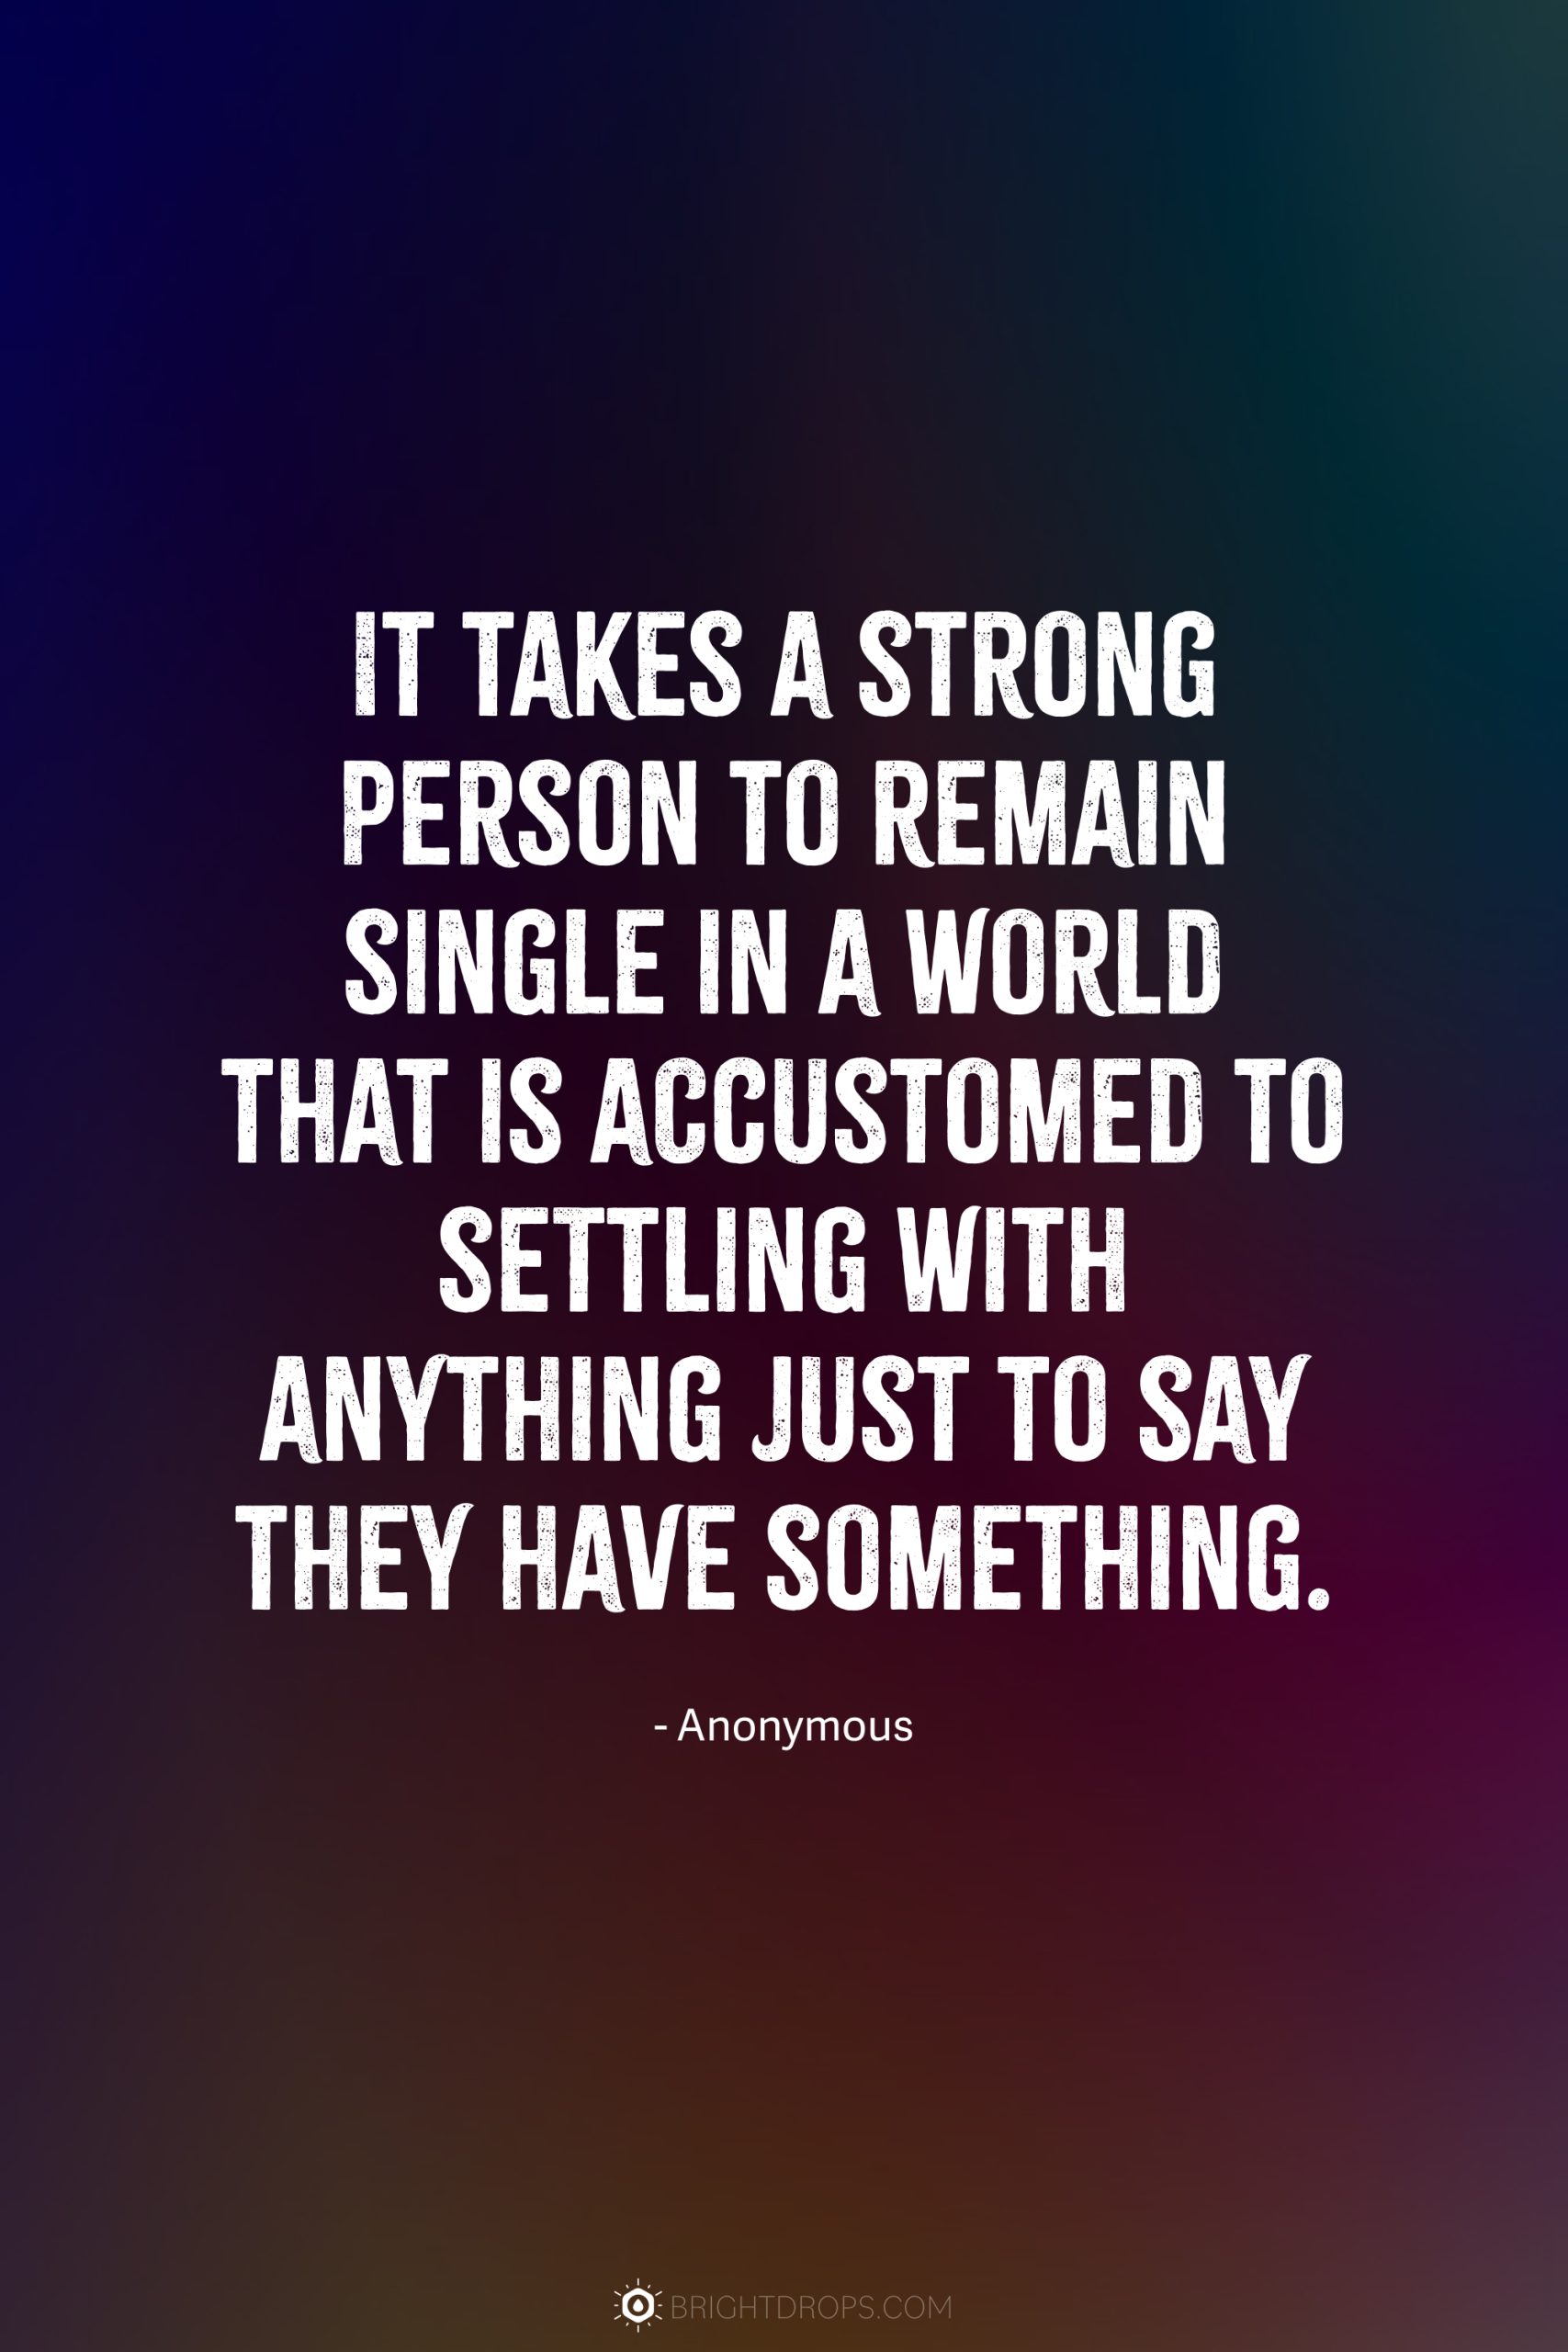 It takes a strong person to remain single in a world that is accustomed to settling with anything just to say they have something.